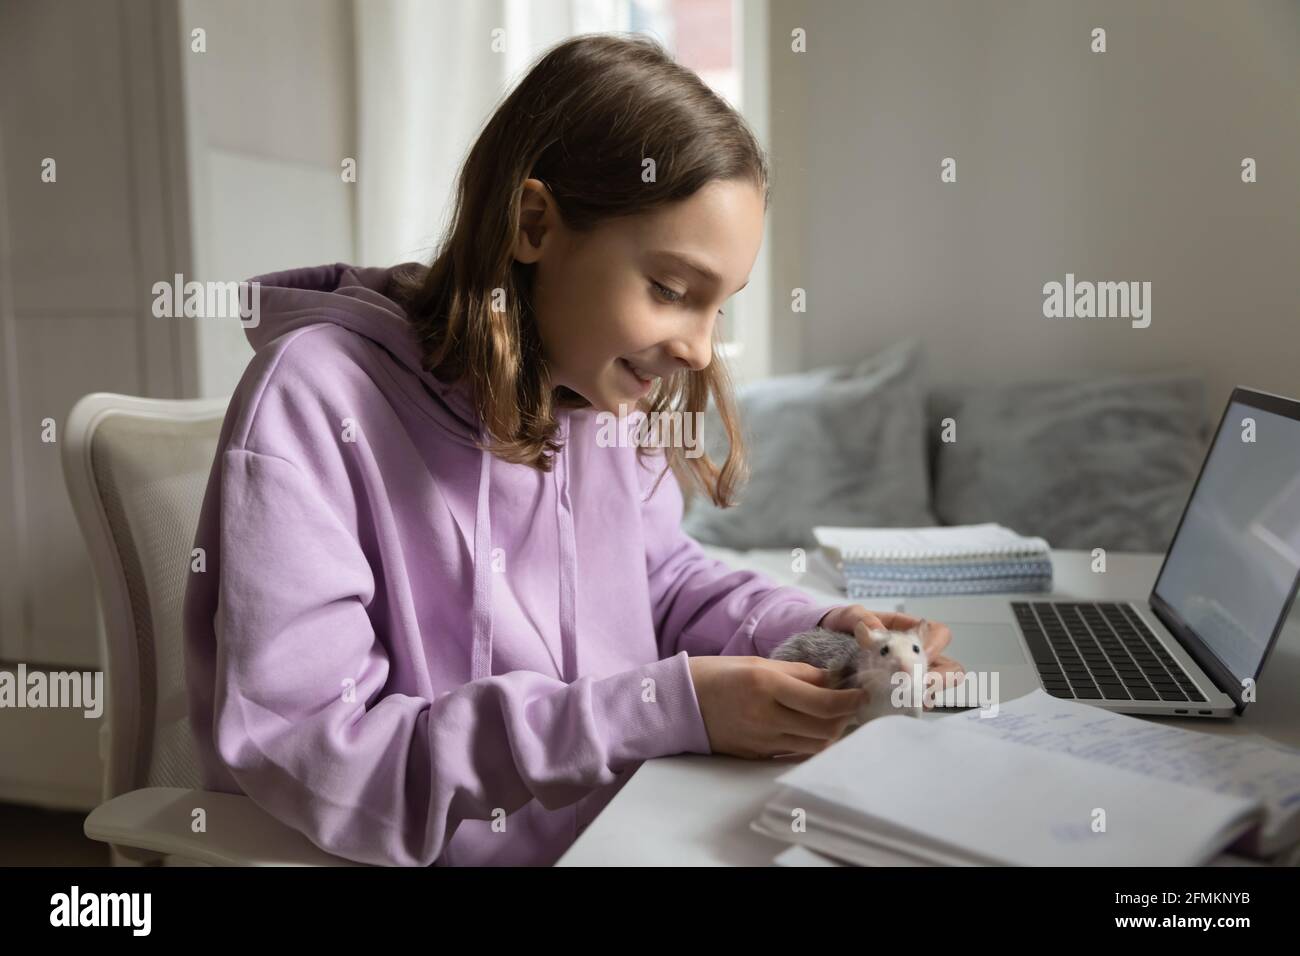 Smiling teen girl playing with domestic animal, sitting at table. Stock Photo